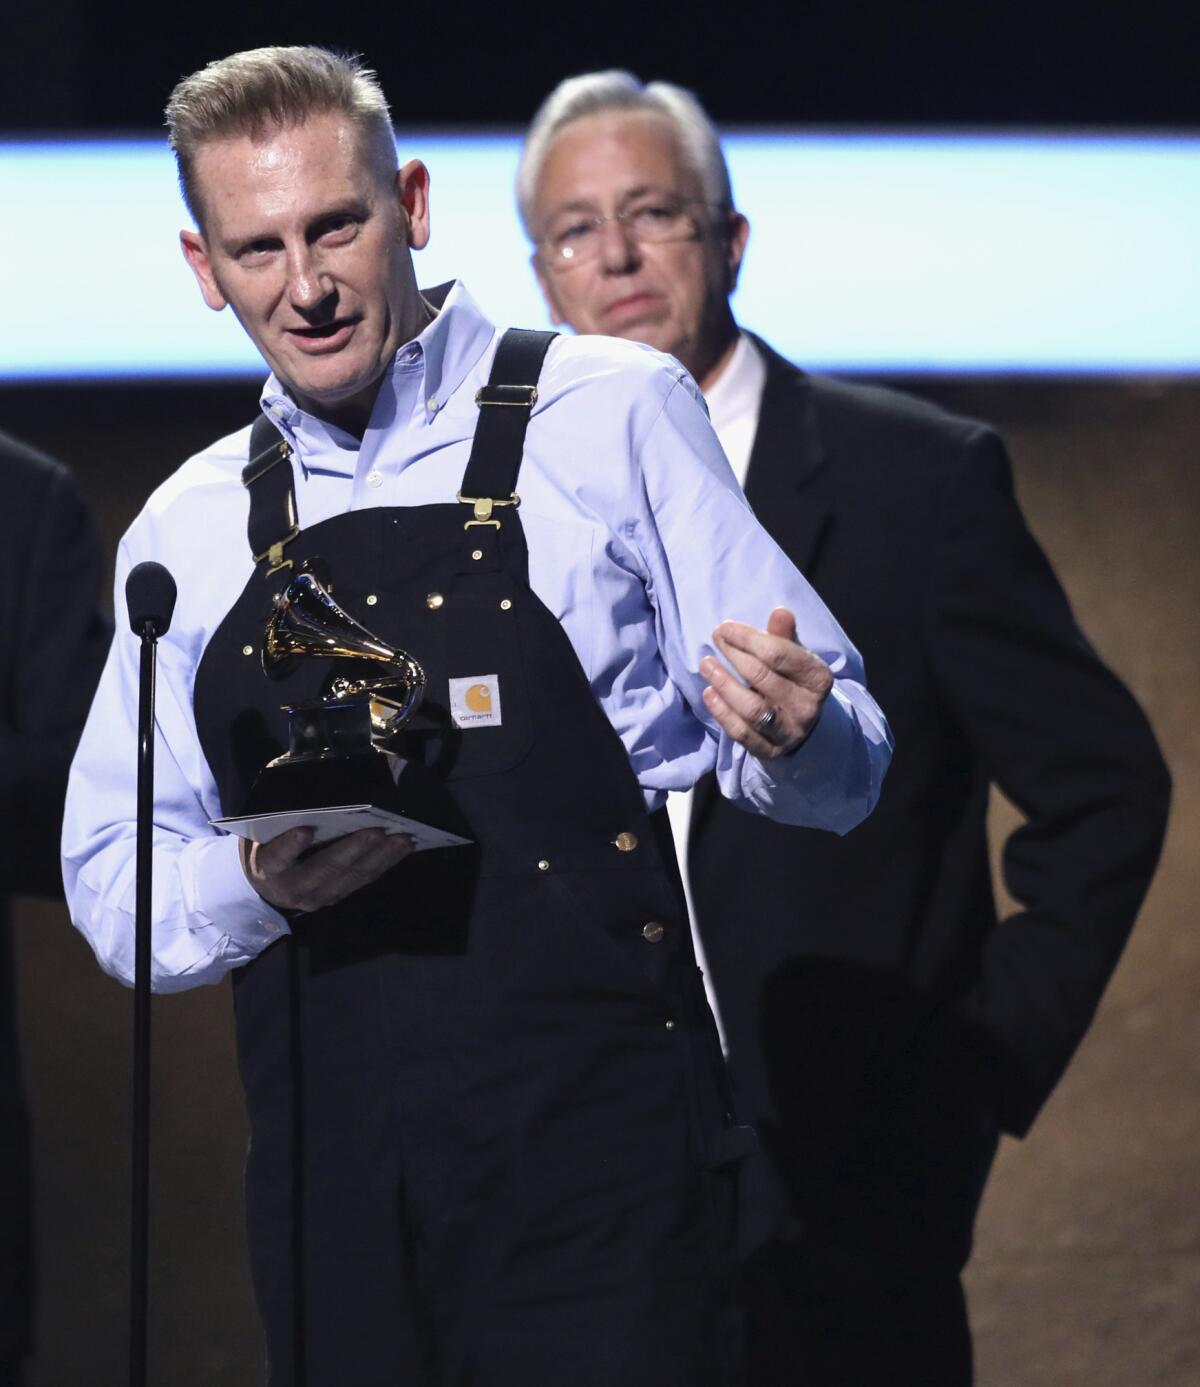 Country singer Rory Feek at the 59th Grammy Awards, accompanied by Jack Martin, the father of his late wife, Joey Feek.